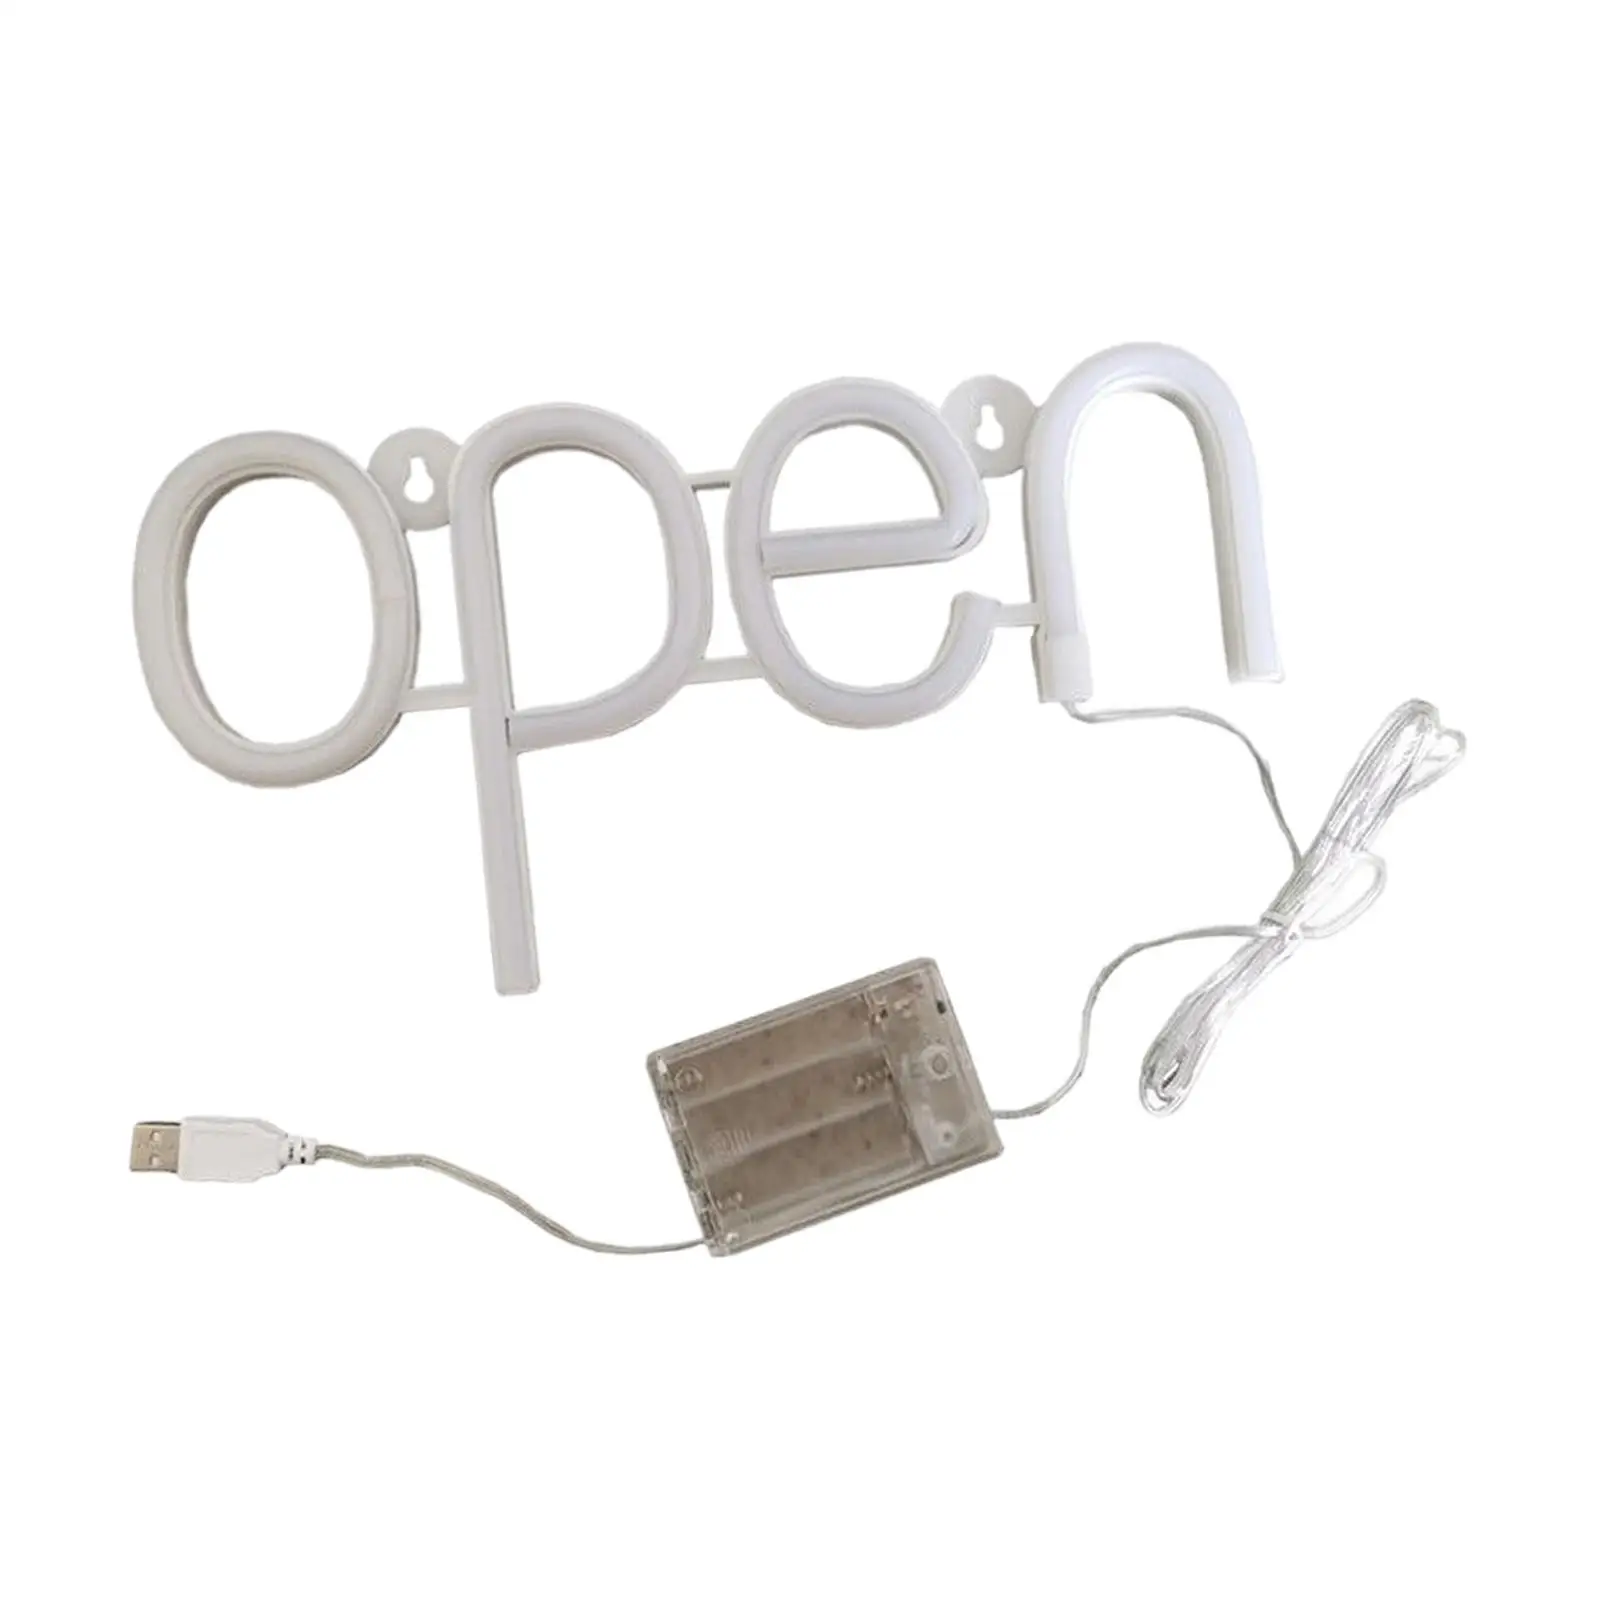 LED Open Sign Lighting Neon Lights Battery Powered Restaurant Wall Hanging Bar Lamp for Cafe Shop Display Window Game Club